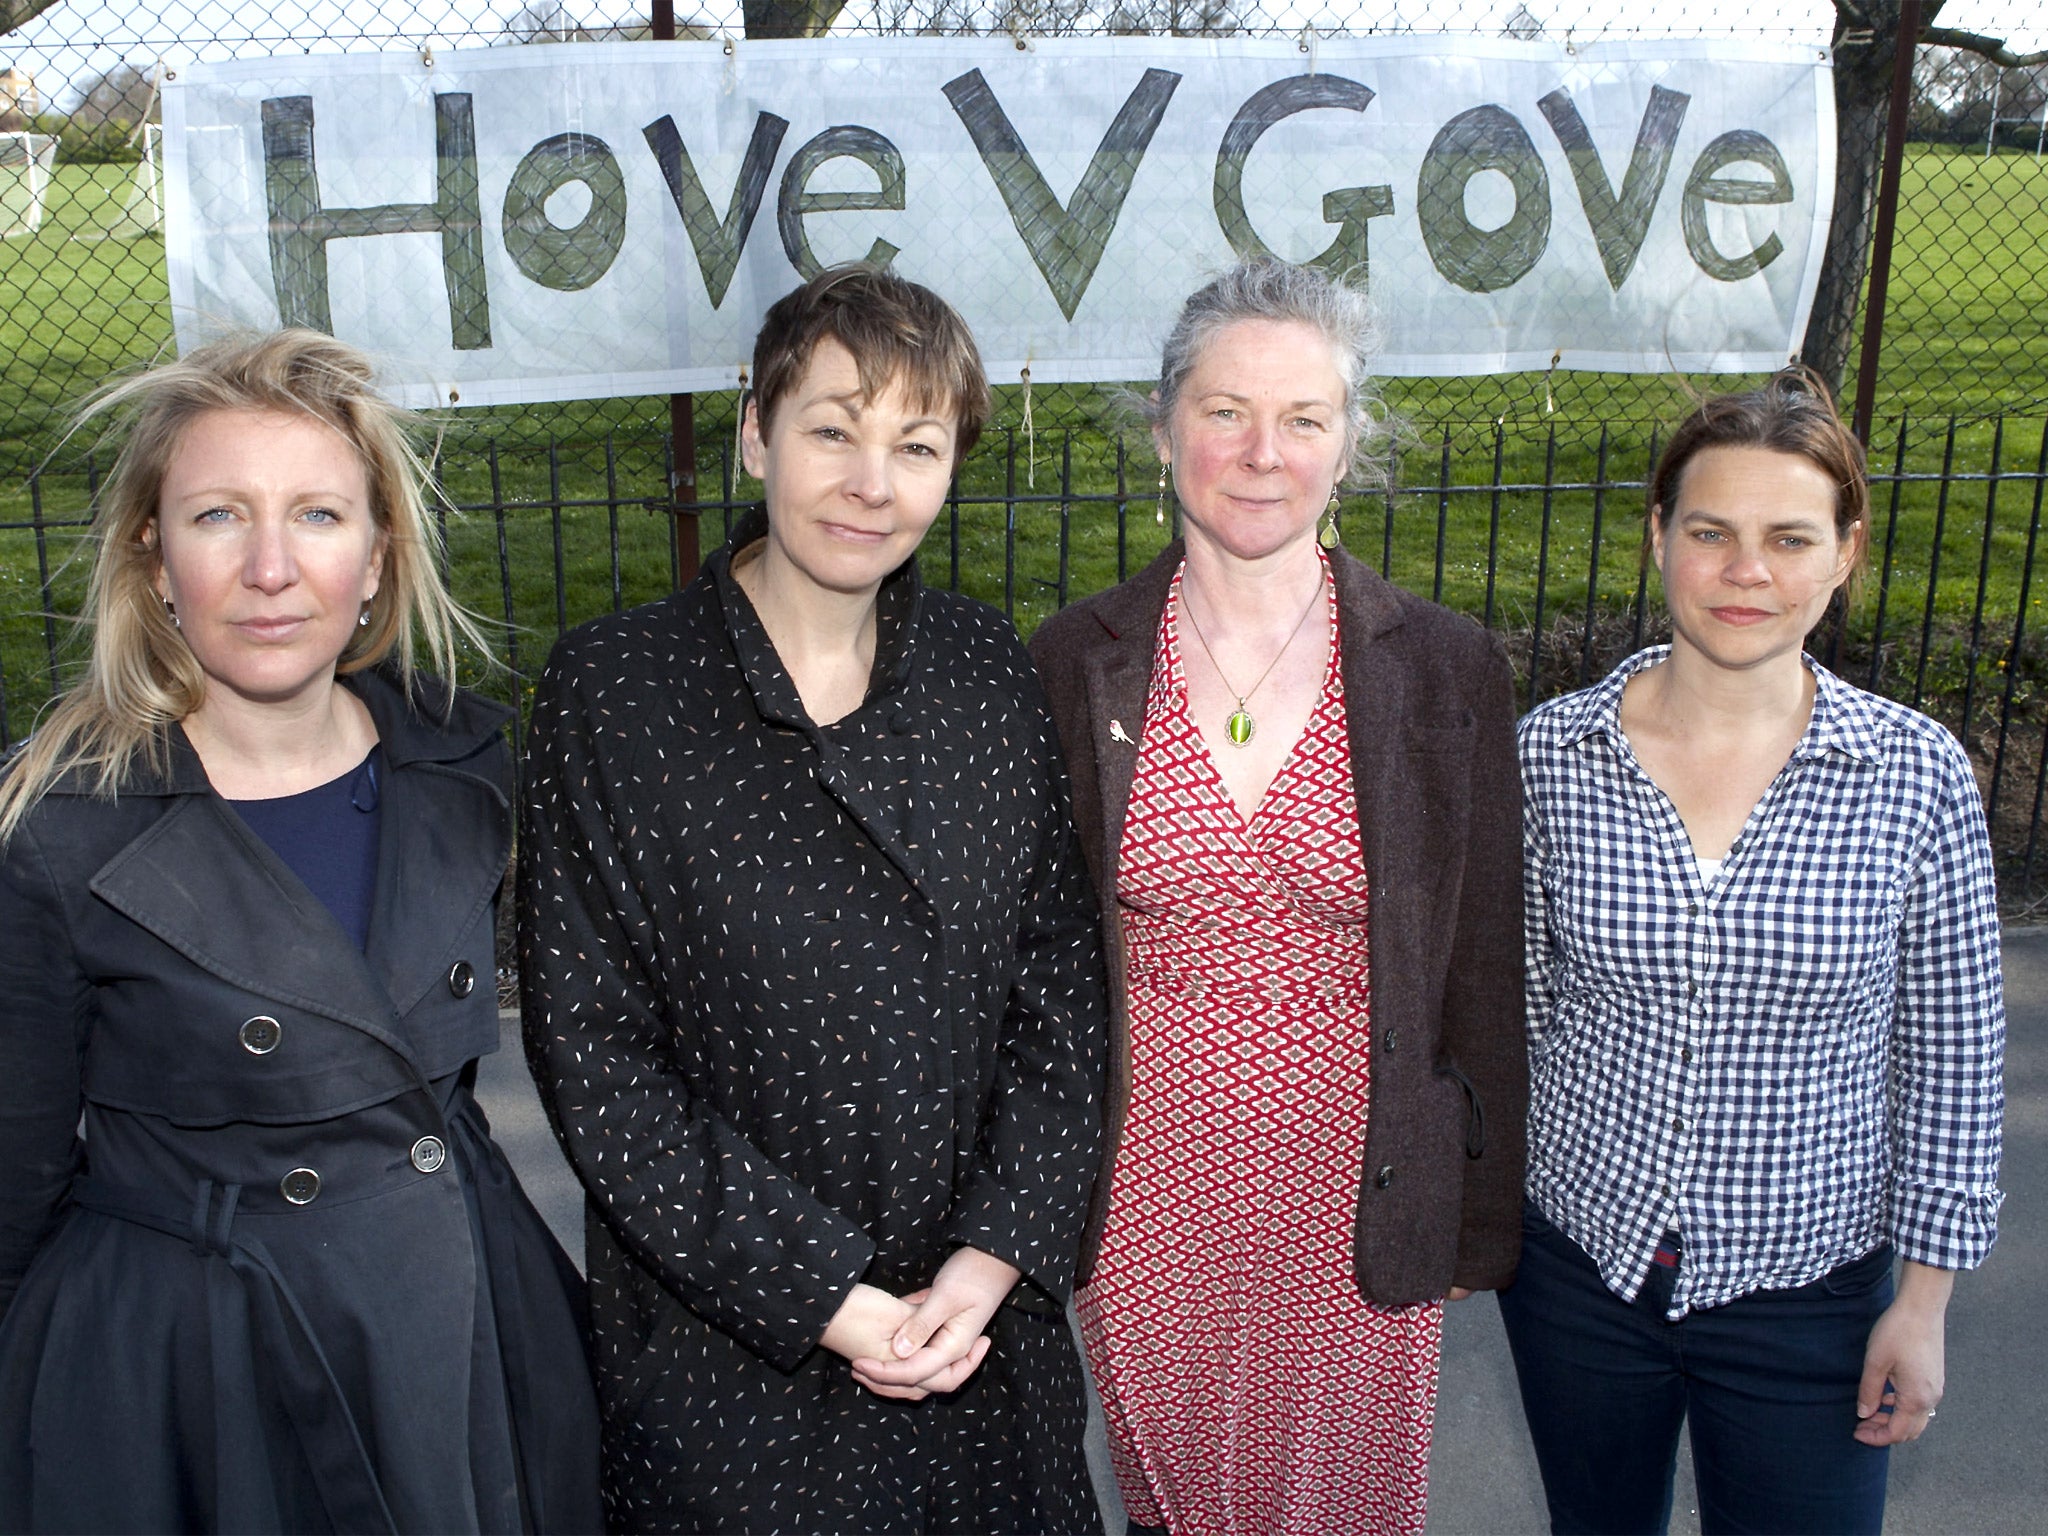 Friends of the Field campaigners: Ruth Buckley, Caroline Lucas MP, Lou McCurdy and Polly Strauss